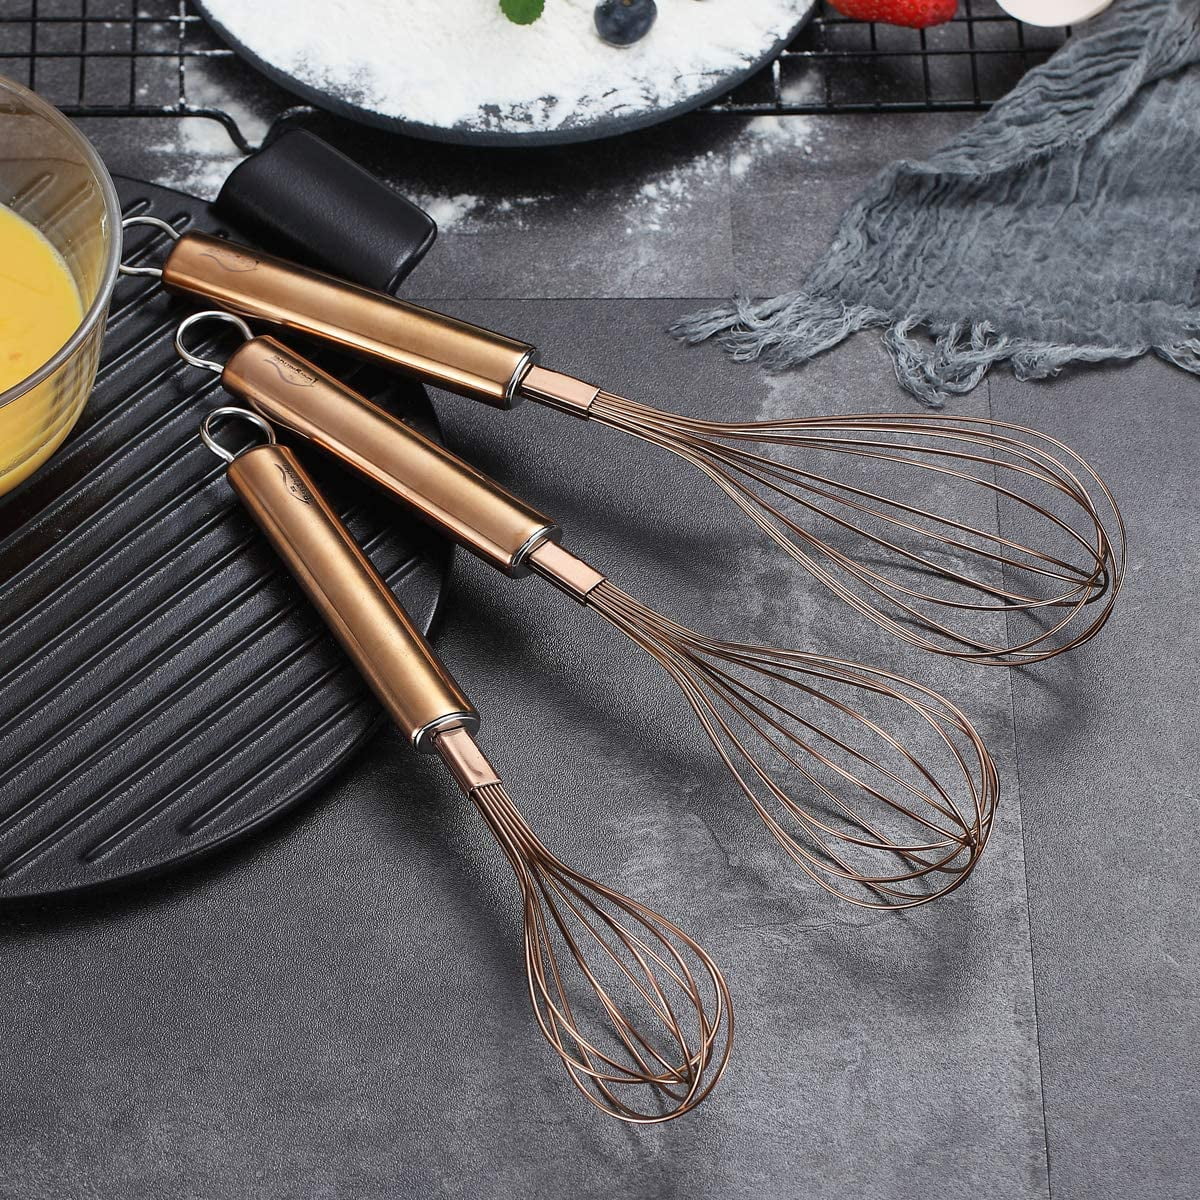 Erewa Mini Wire Whisks Set of 5 Pcs 7 Inches Small Stainless Steel Whisks  for Cooking